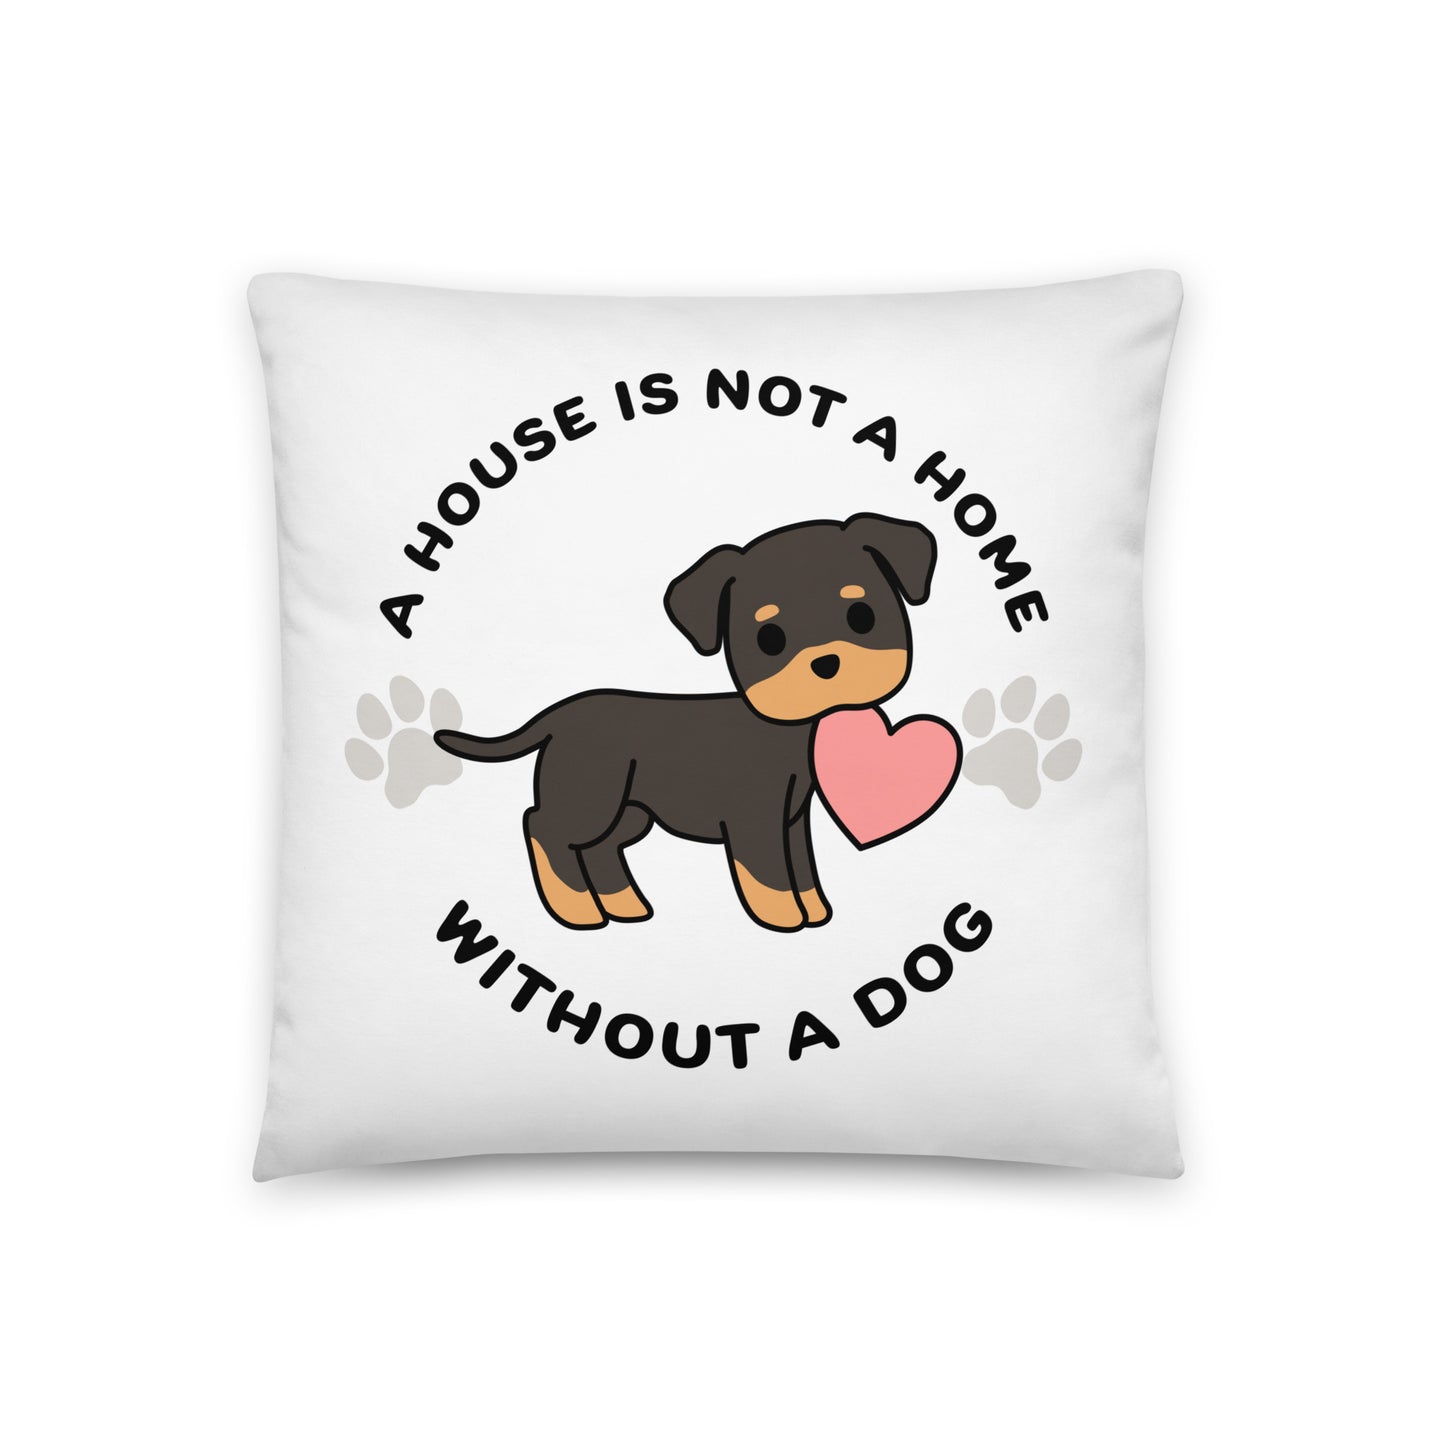 A white, 18" x 18" pillow featuing a cute, stylized illustration of a Rottweiler holding a heart in its mouth. Text in a circle around the dog reads "A house is not a home without a dog"